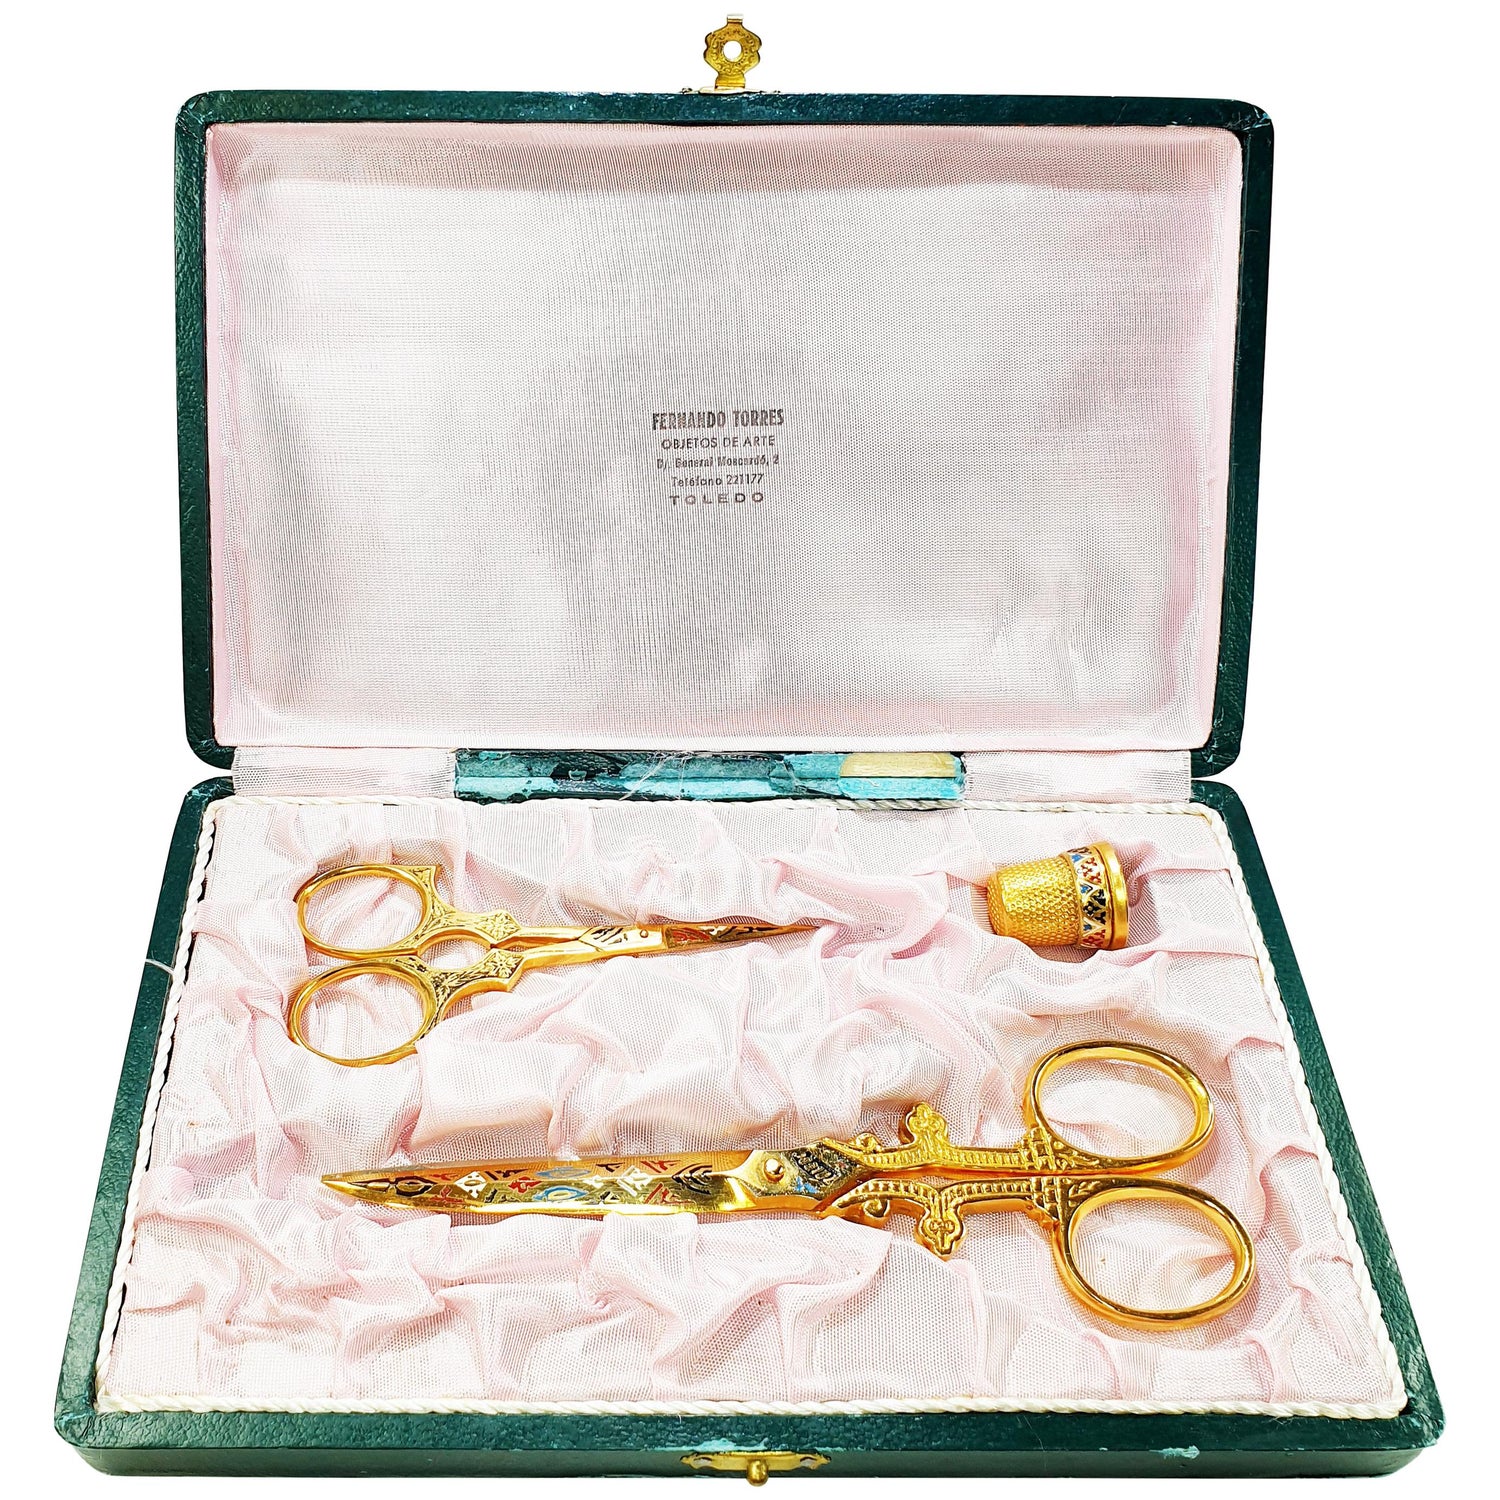 Vintage gold sewing kit with box